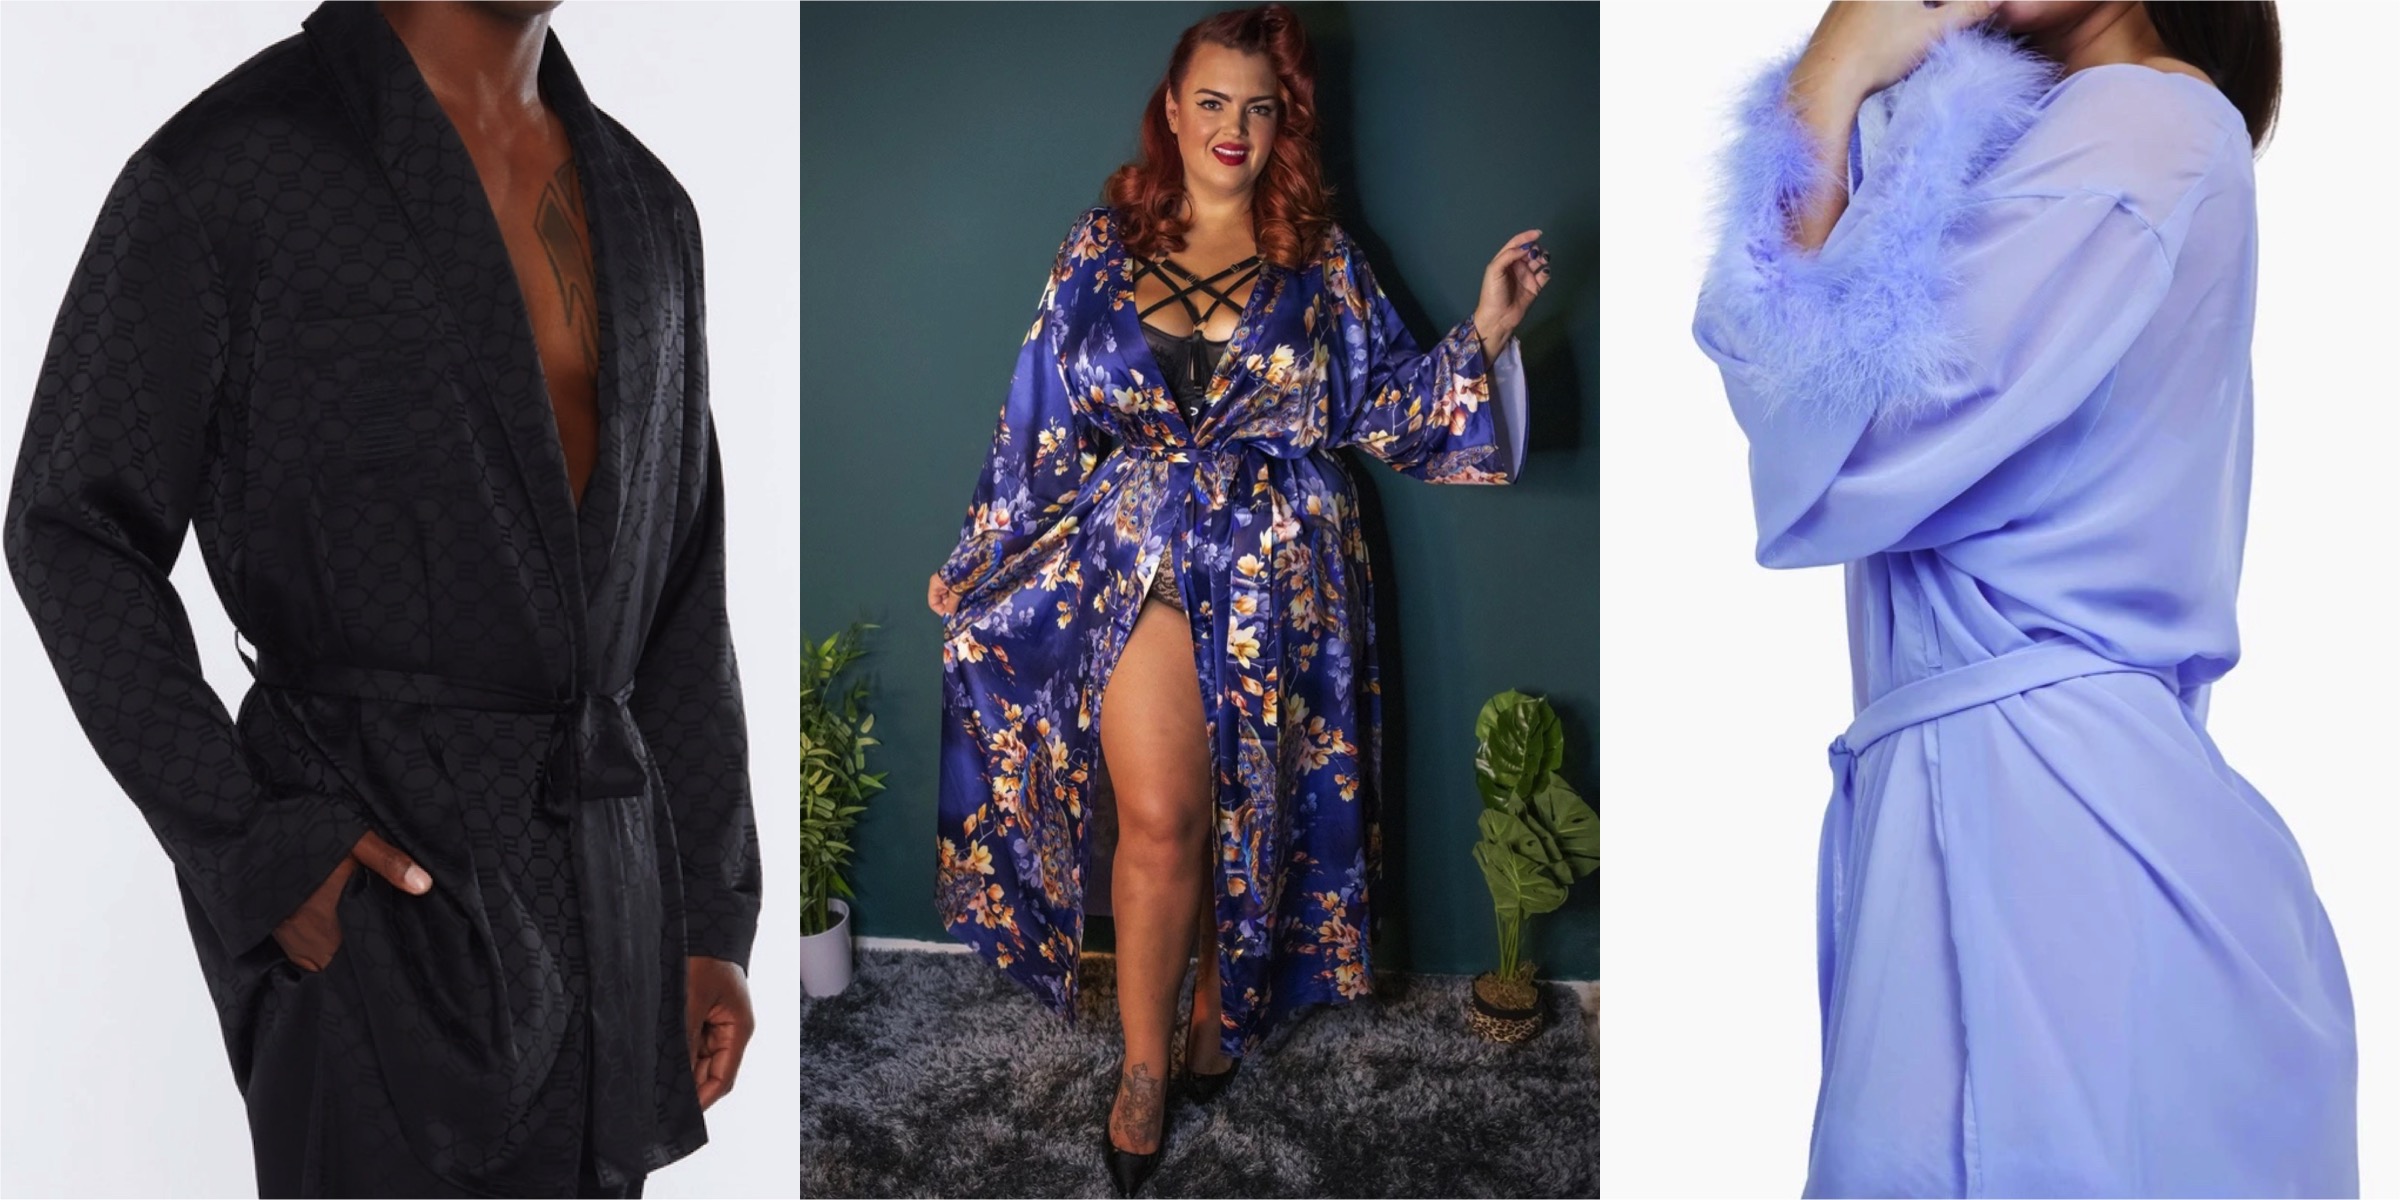 A collage of three models wearing robes, from L to R, a men's smoking jacket, a flowing satin peacock-patterned robe, and a feathered lilac chiffon robe